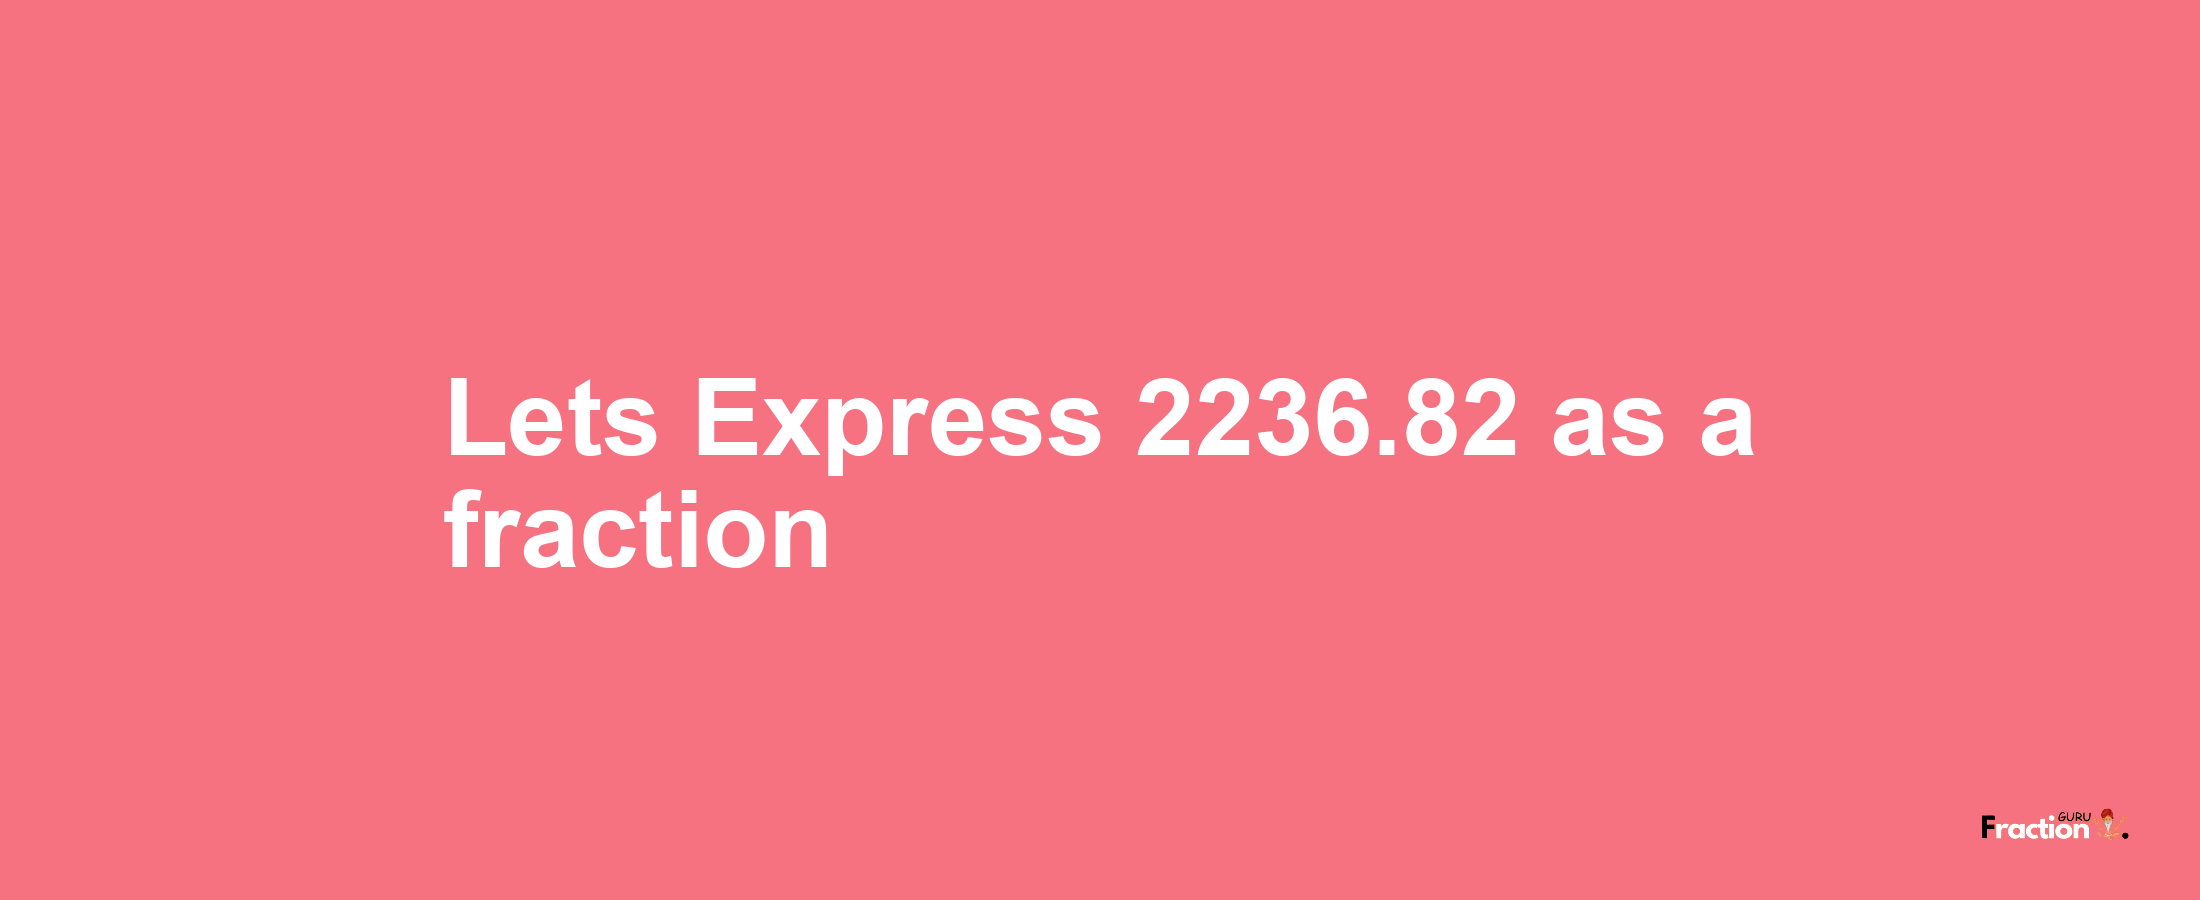 Lets Express 2236.82 as afraction